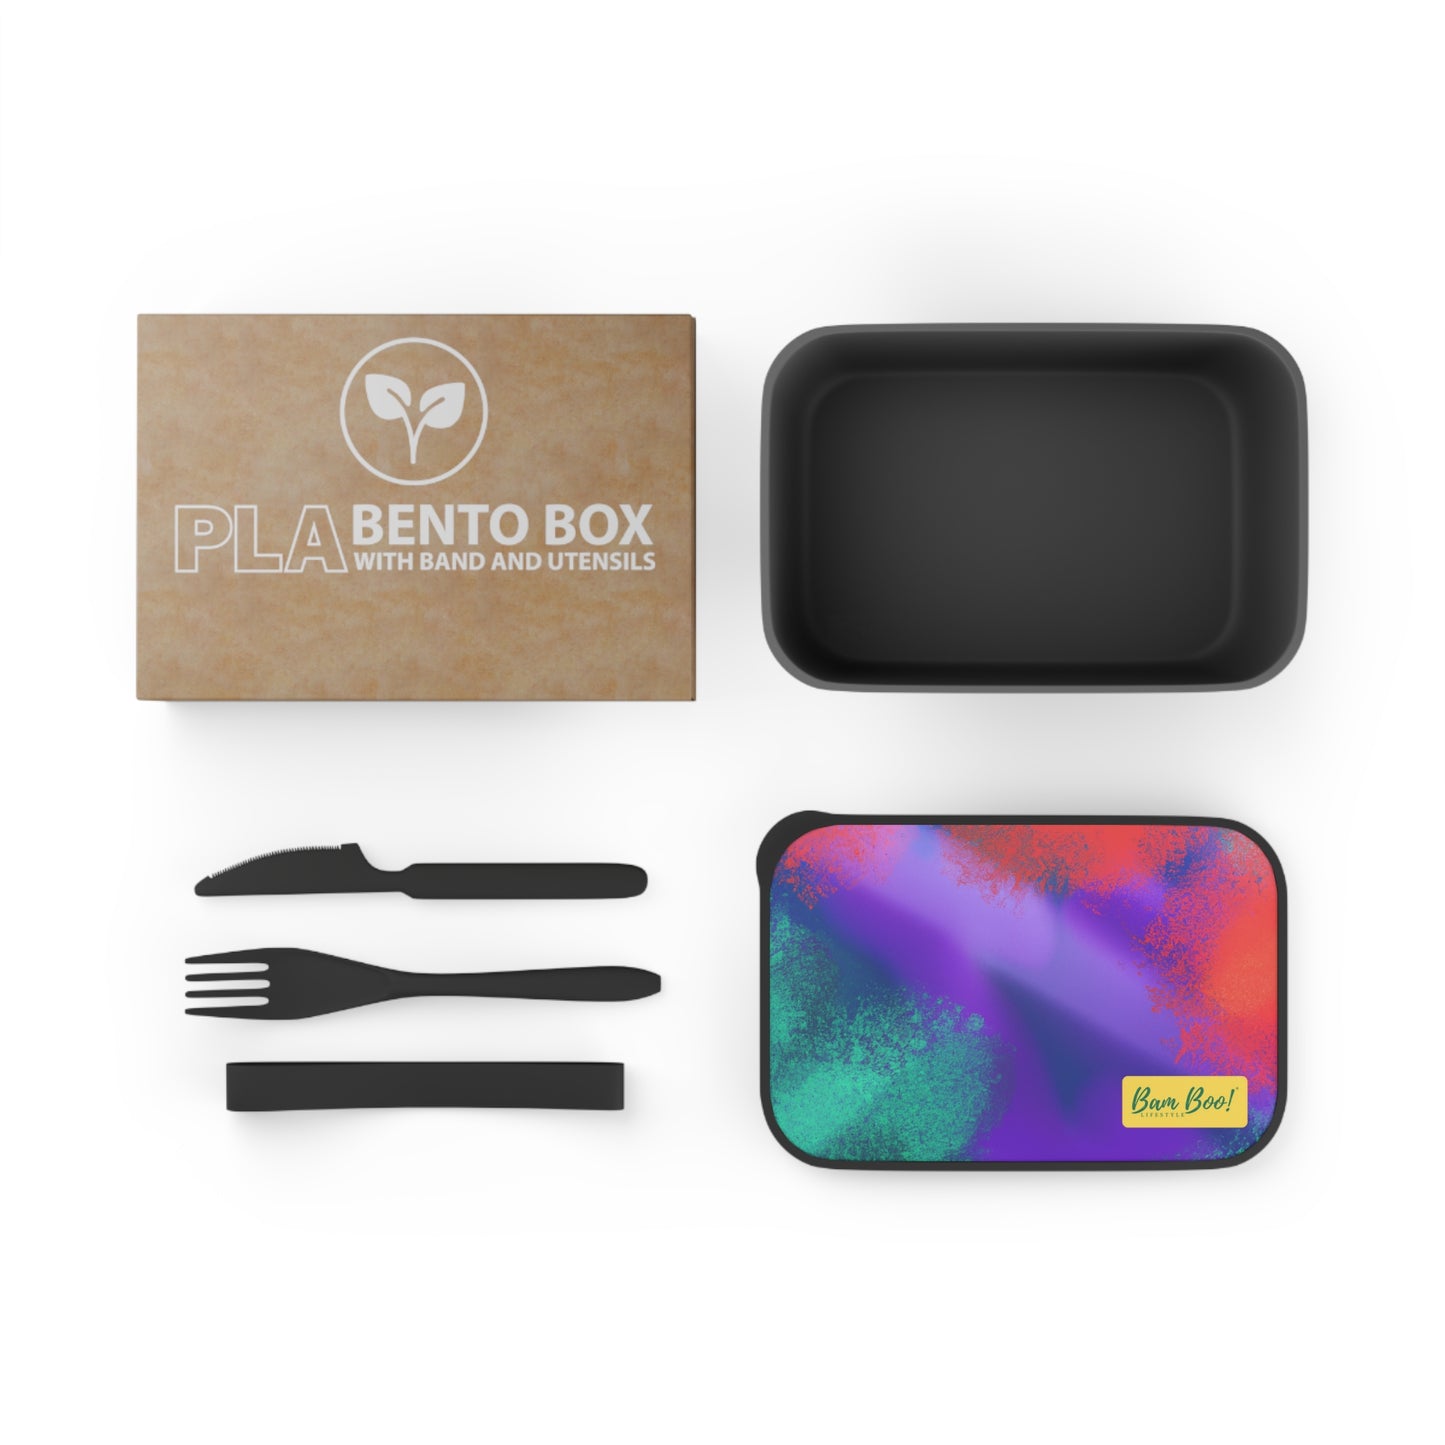 "In the Ever-Shifting Sky: An Abstract Exploration" - Bam Boo! Lifestyle Eco-friendly PLA Bento Box with Band and Utensils